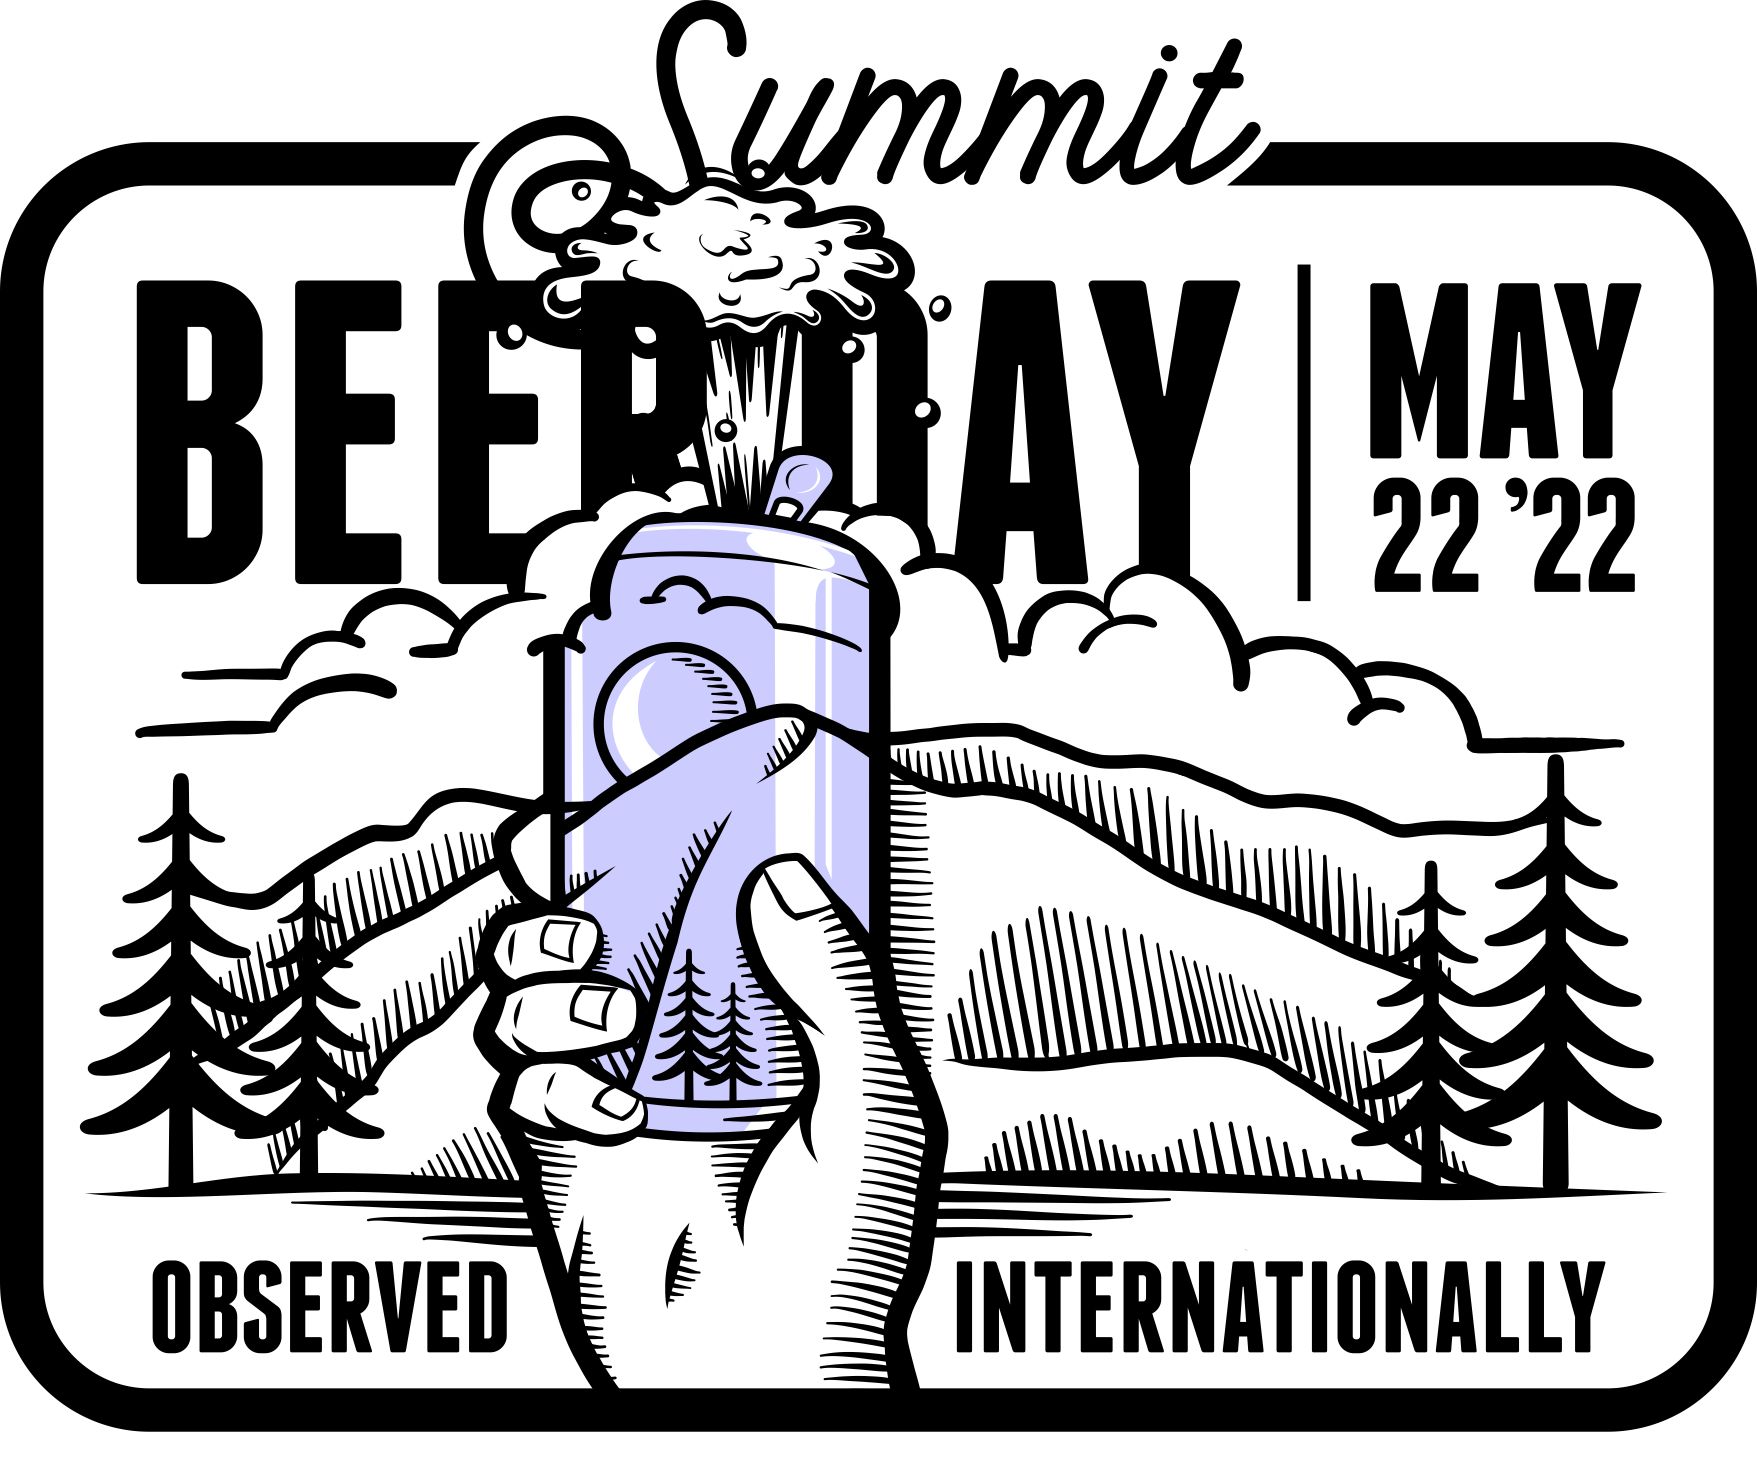 Beer Summit Day